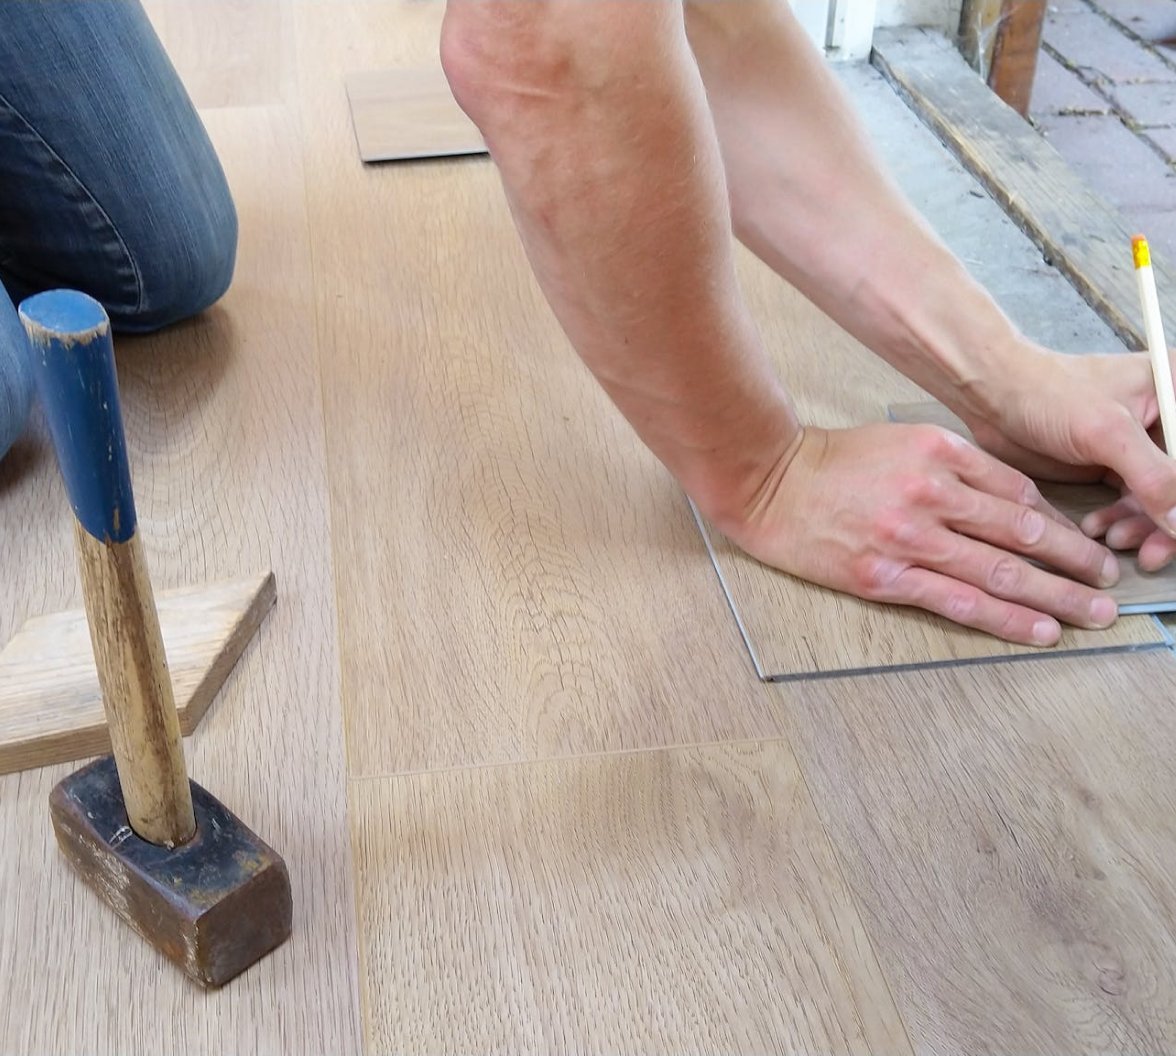 Step by step guide to install vinyl plank flooring